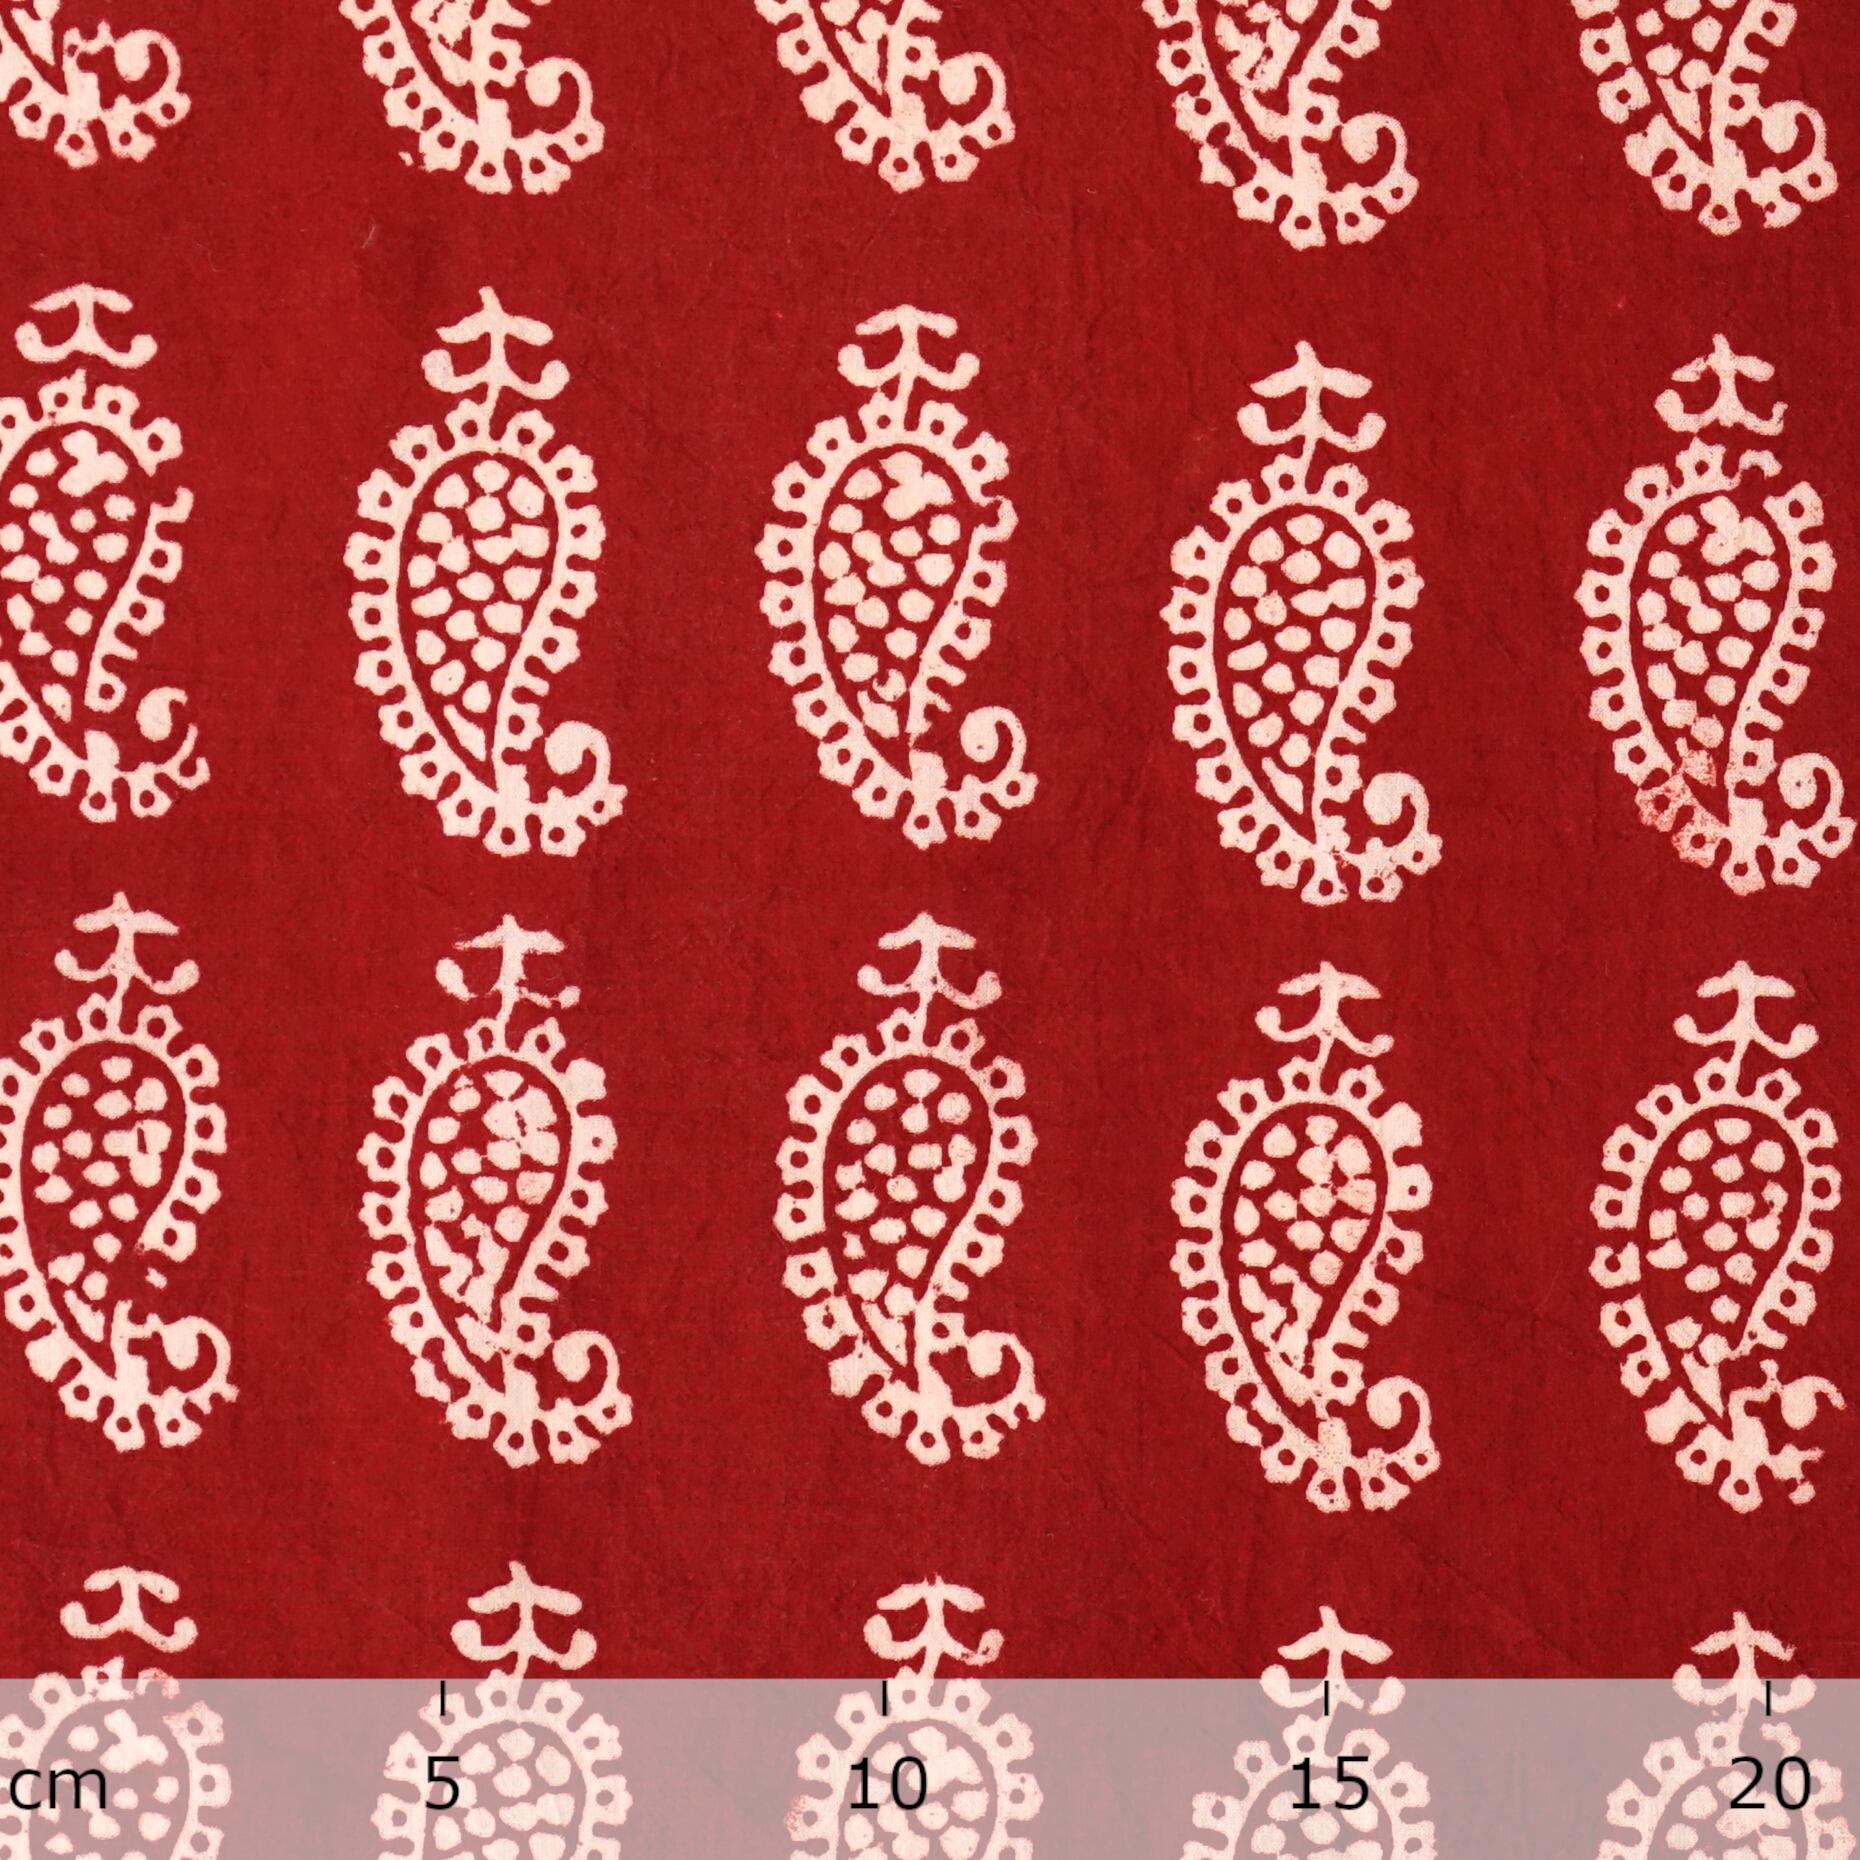 100% Block-Printed Cotton Fabric From India - Raindrops Design - Iron Rust Black & Alizarin Red Dyes - Ruler